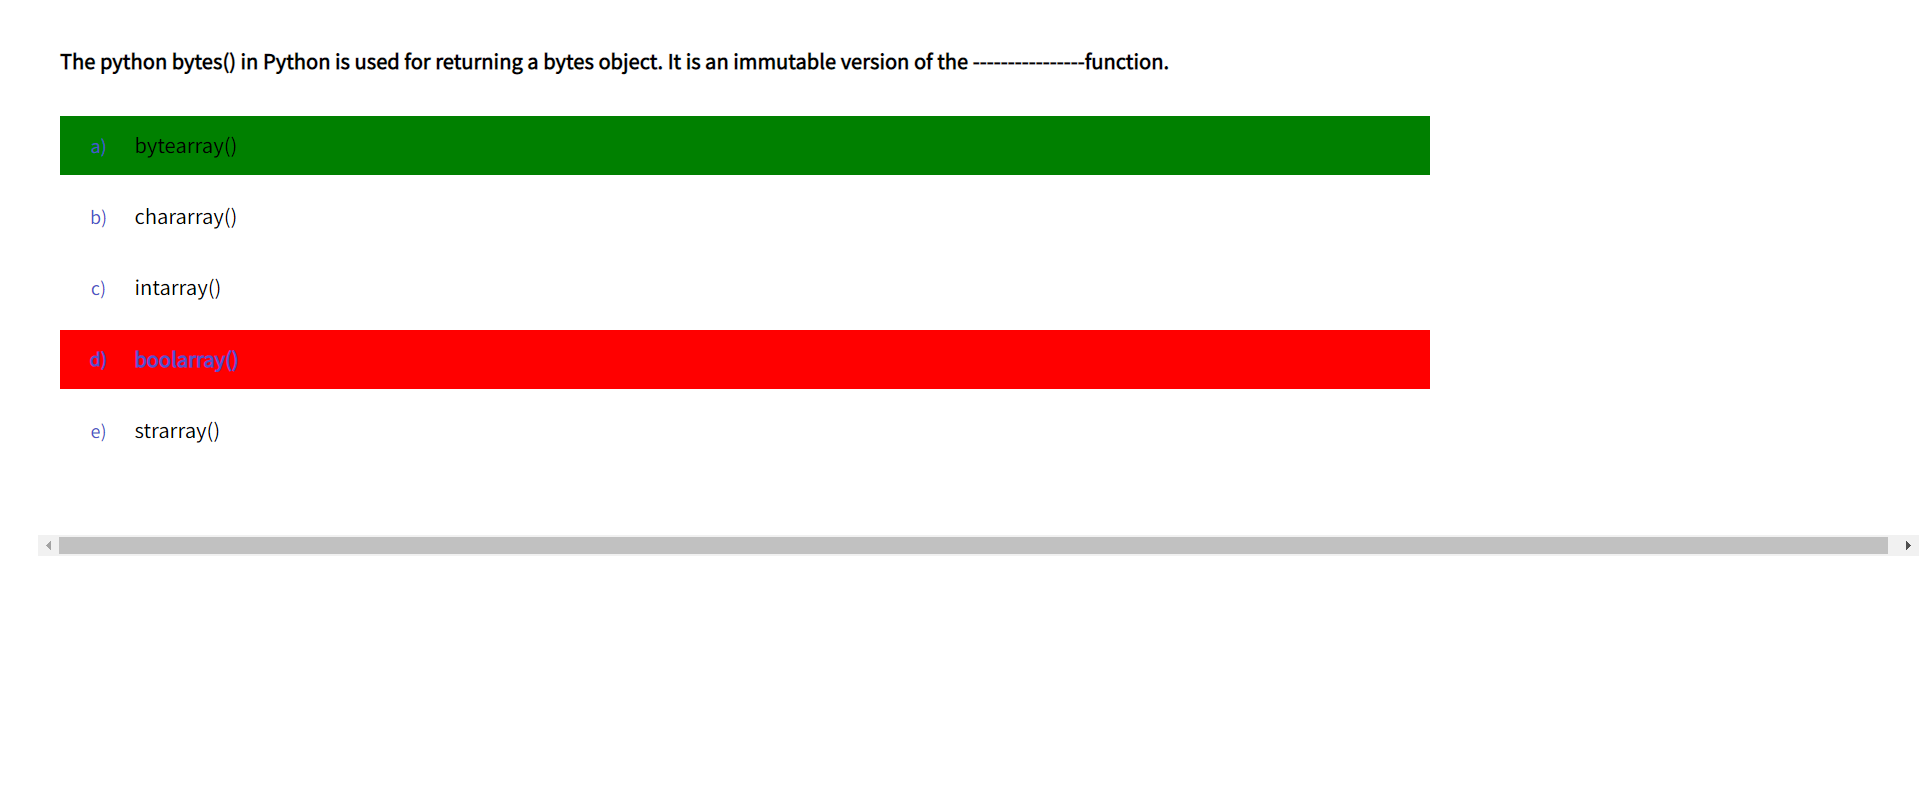 7. Once the answer is submitted, and when the faculty selects the ‘Show Question Results’ option, the student will be able to view the right and wrong answer shaded in green and red respectively.